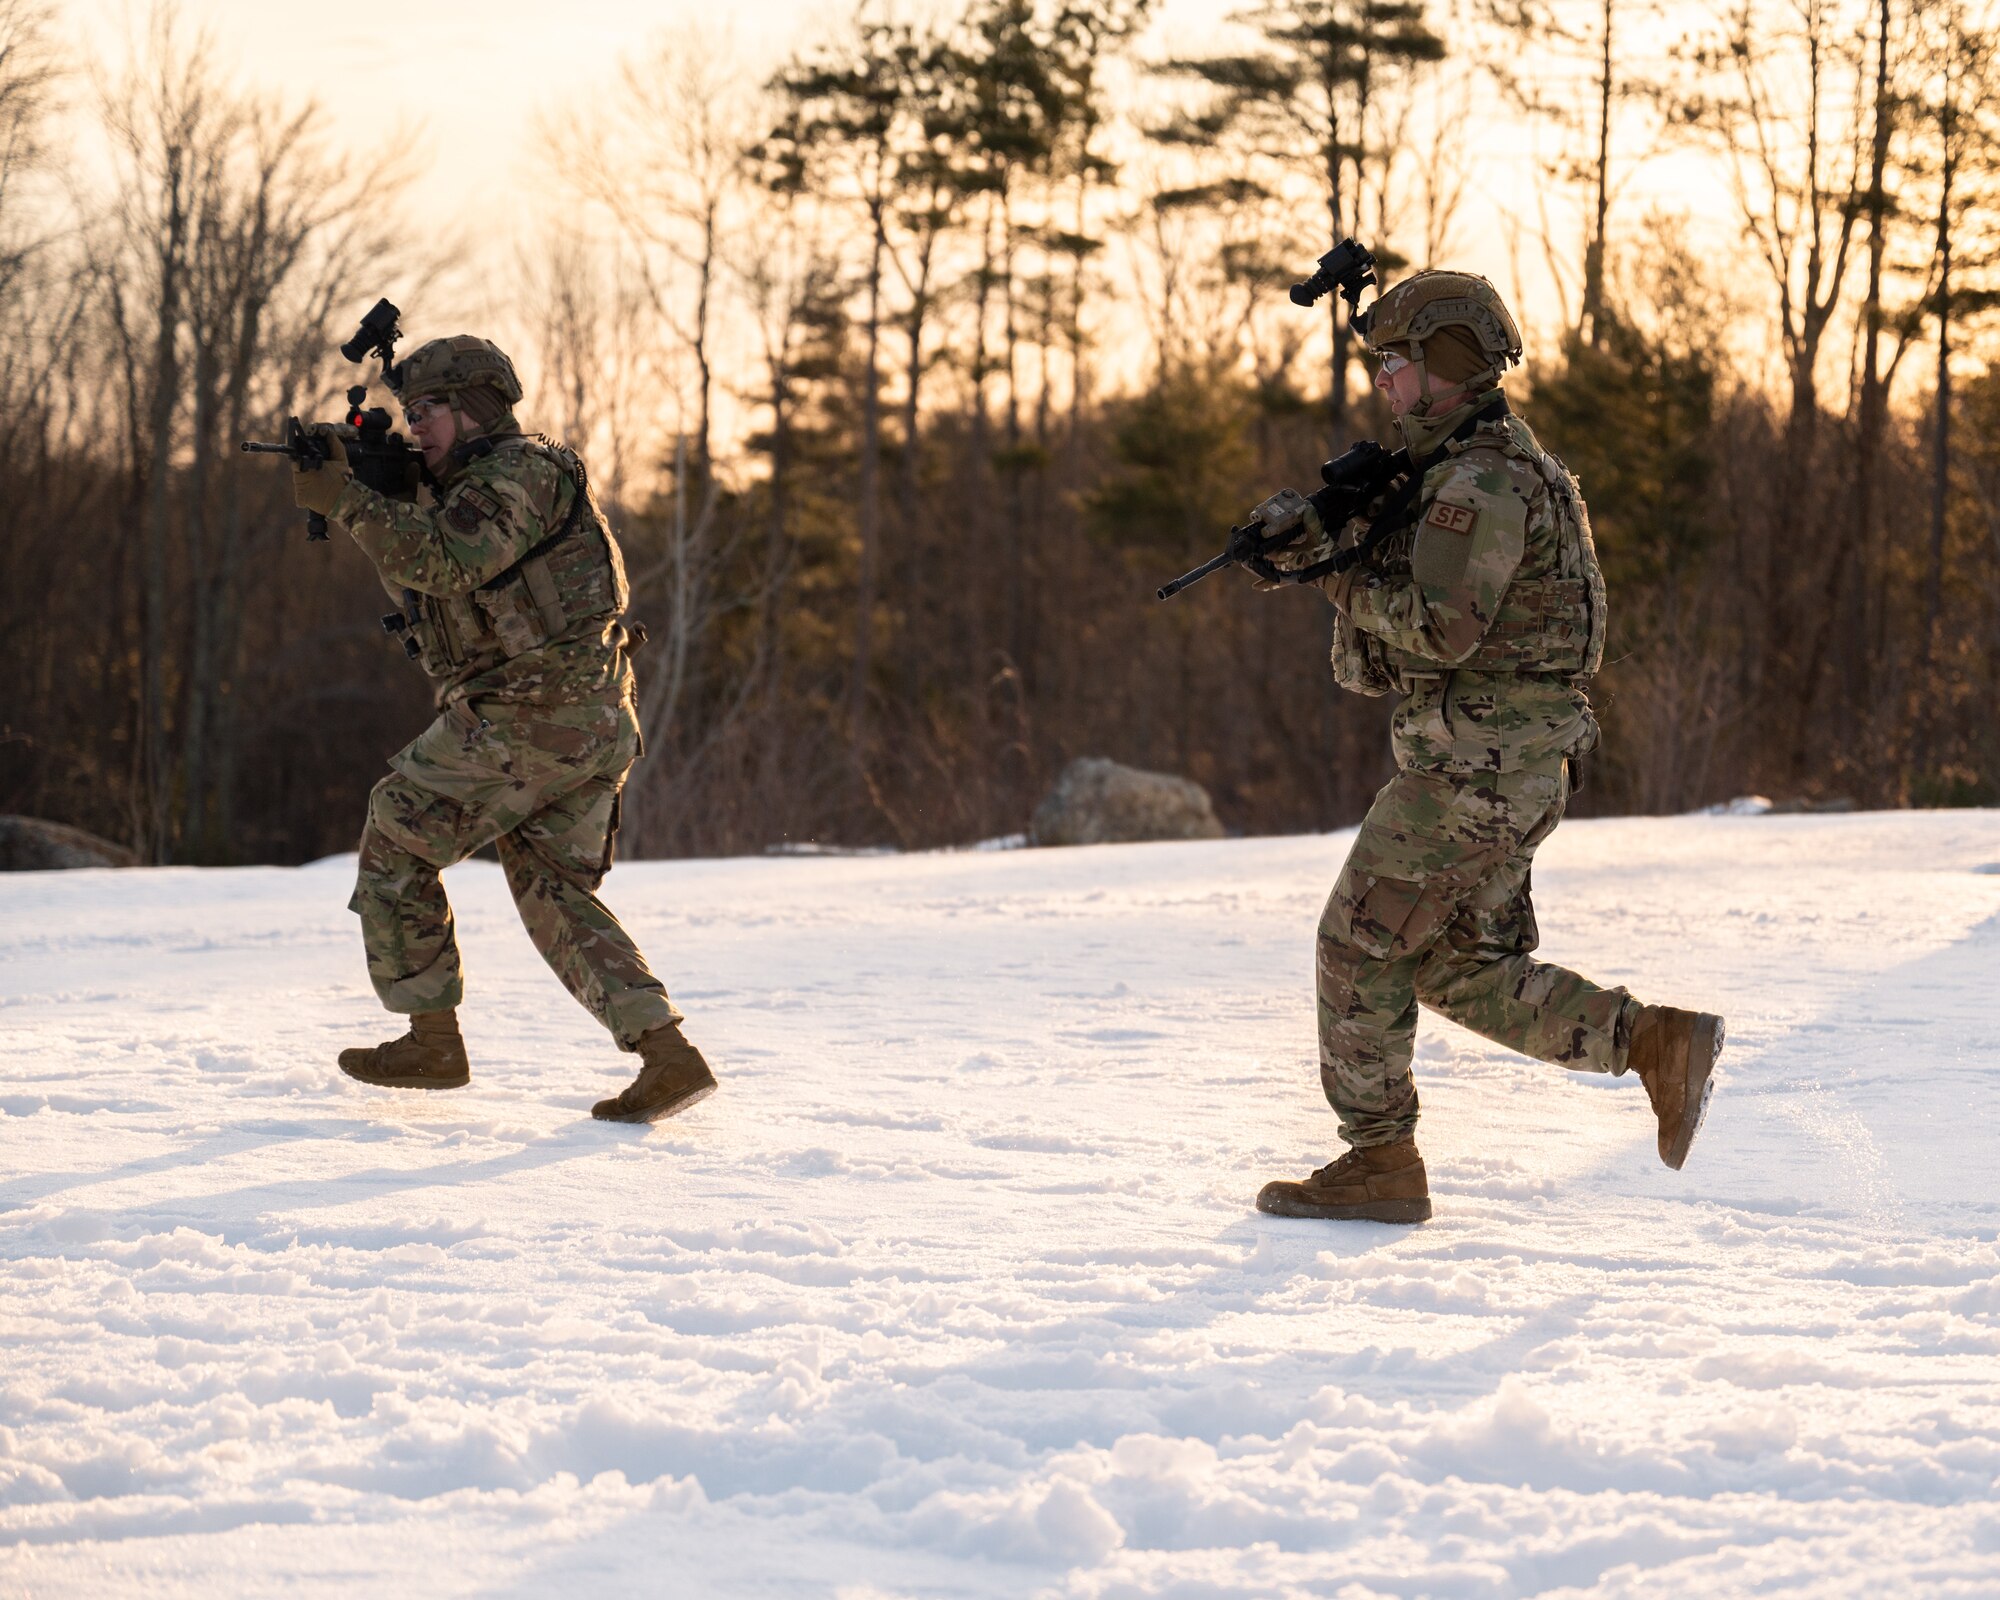 Tech. Sgt. Ryan Welch and Senior Airman Christian Montembeau, members of the 157th Security Forces Squadron, clear a training village